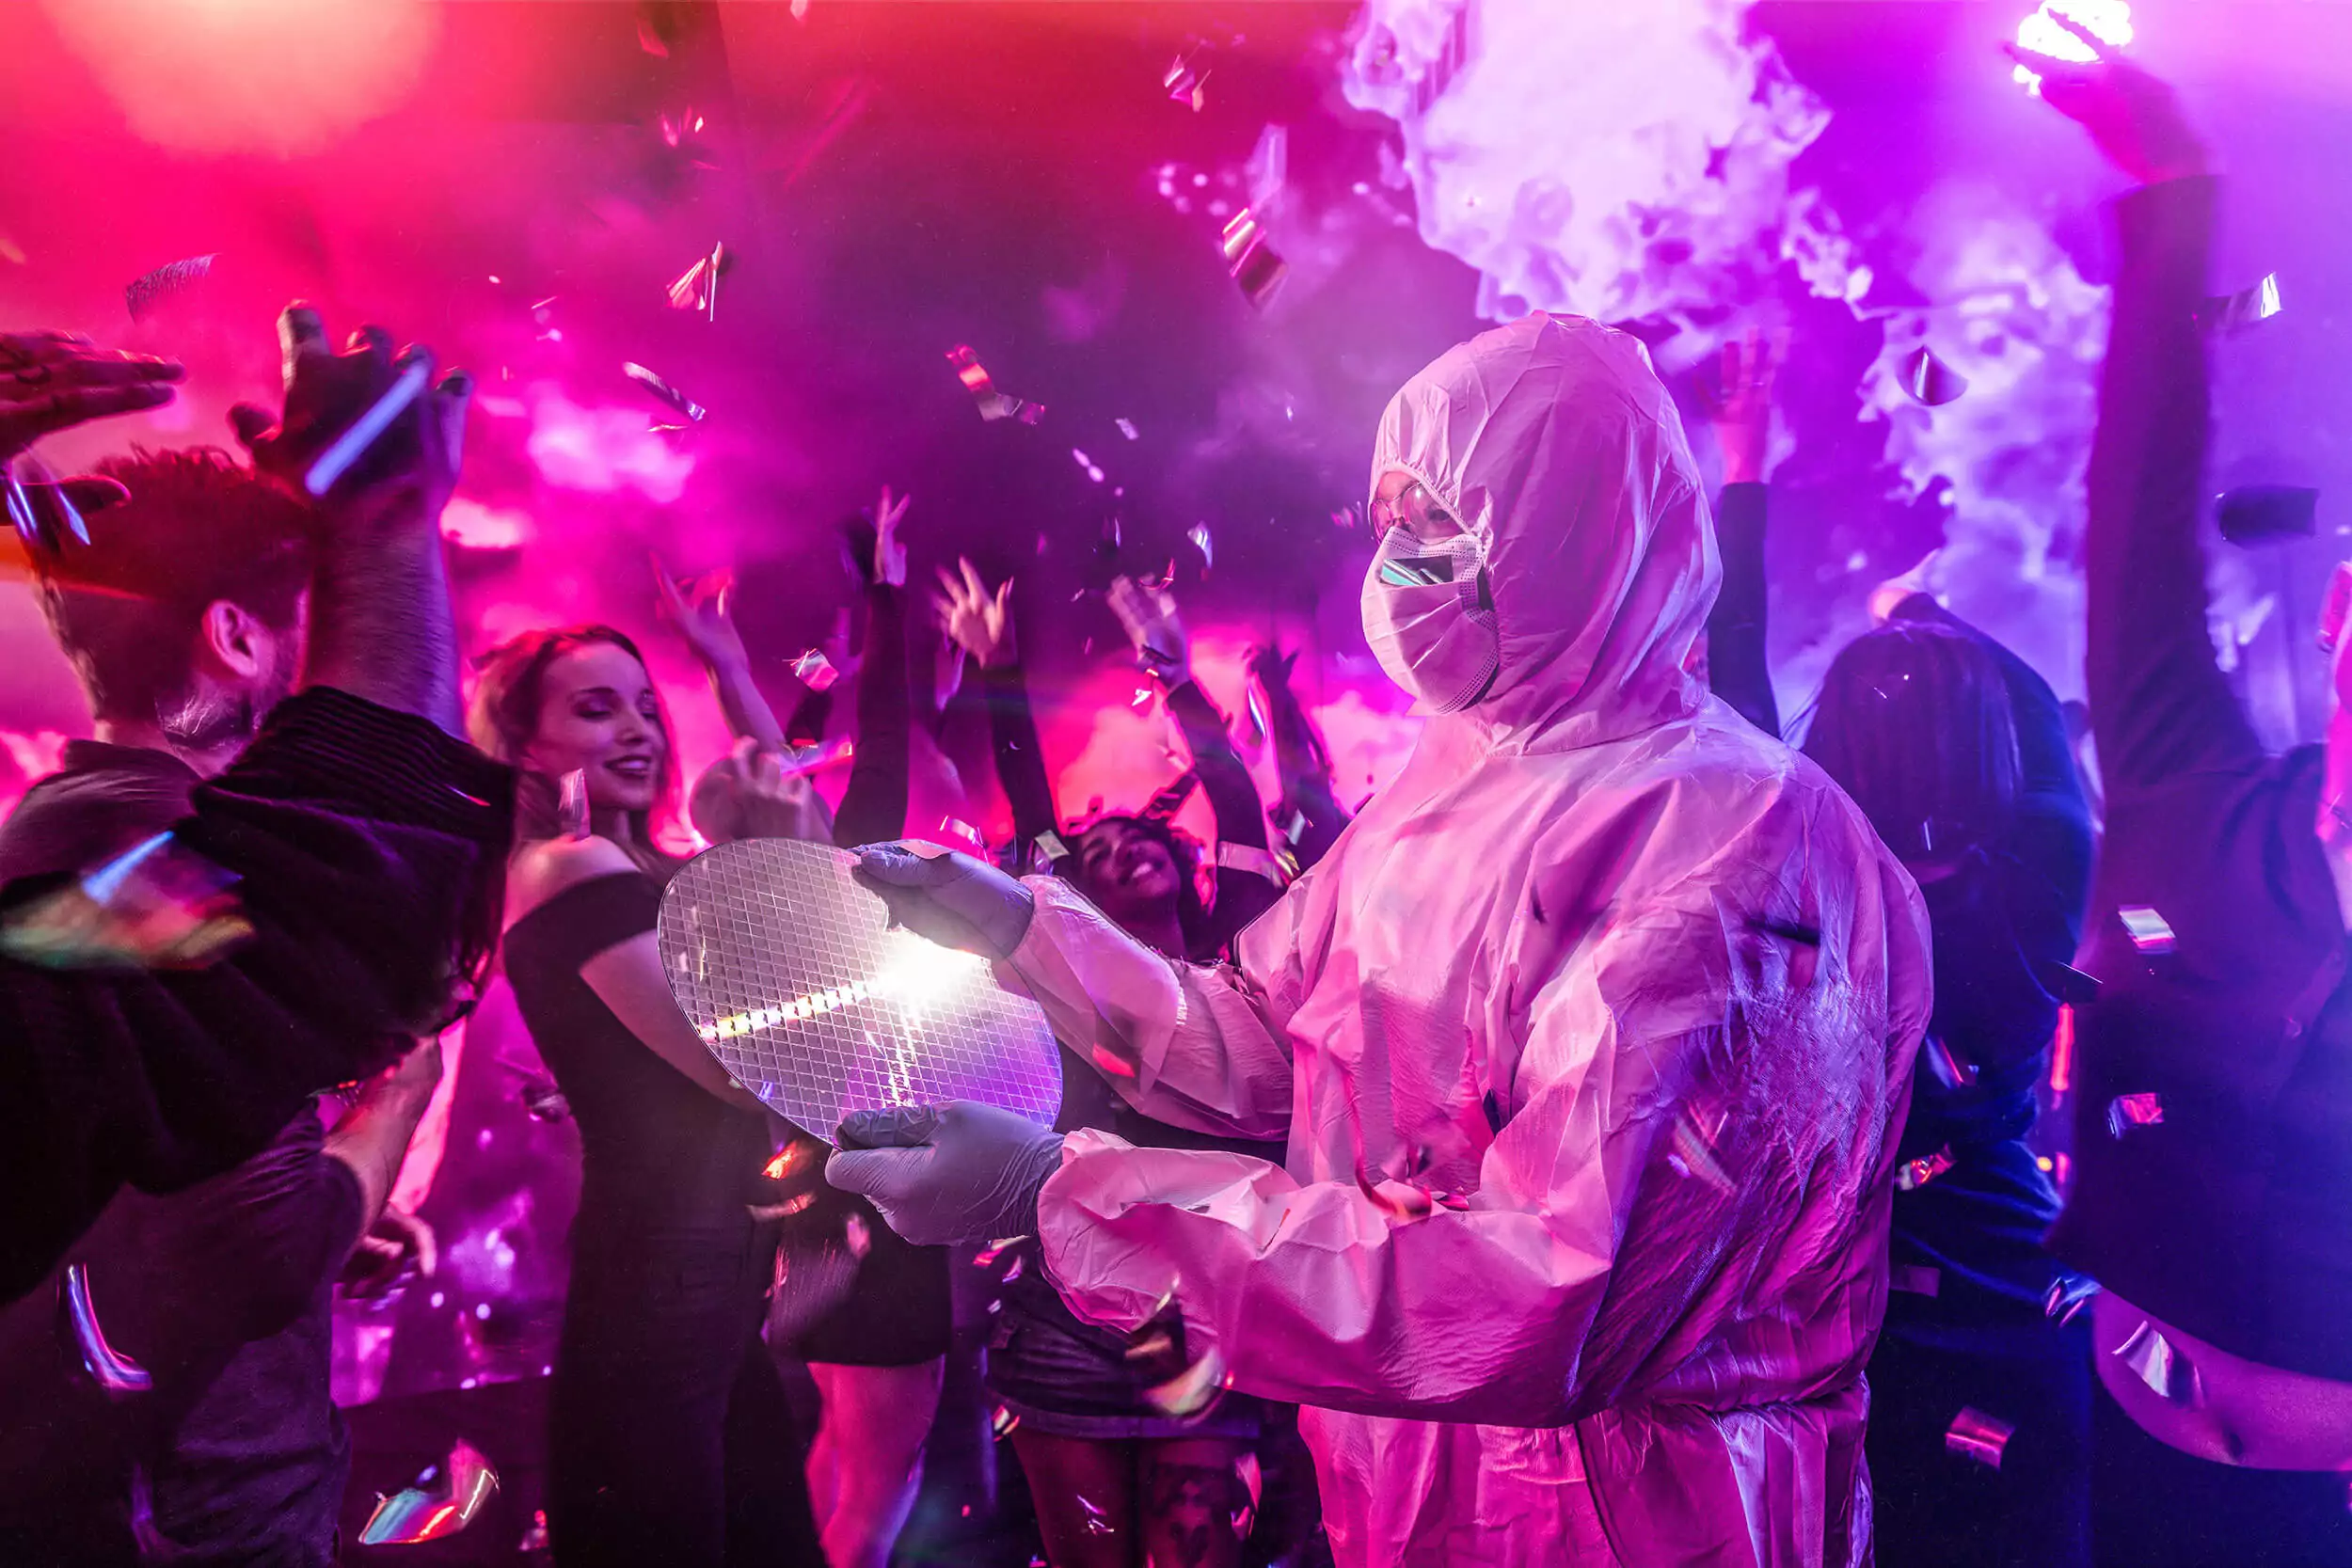 Engineer in white, full-body, protective lab gear, clear goggles, a surgical mask and latex gloves holds a circular semiconductor plate in a crowd of partying people with shining confetti falling.